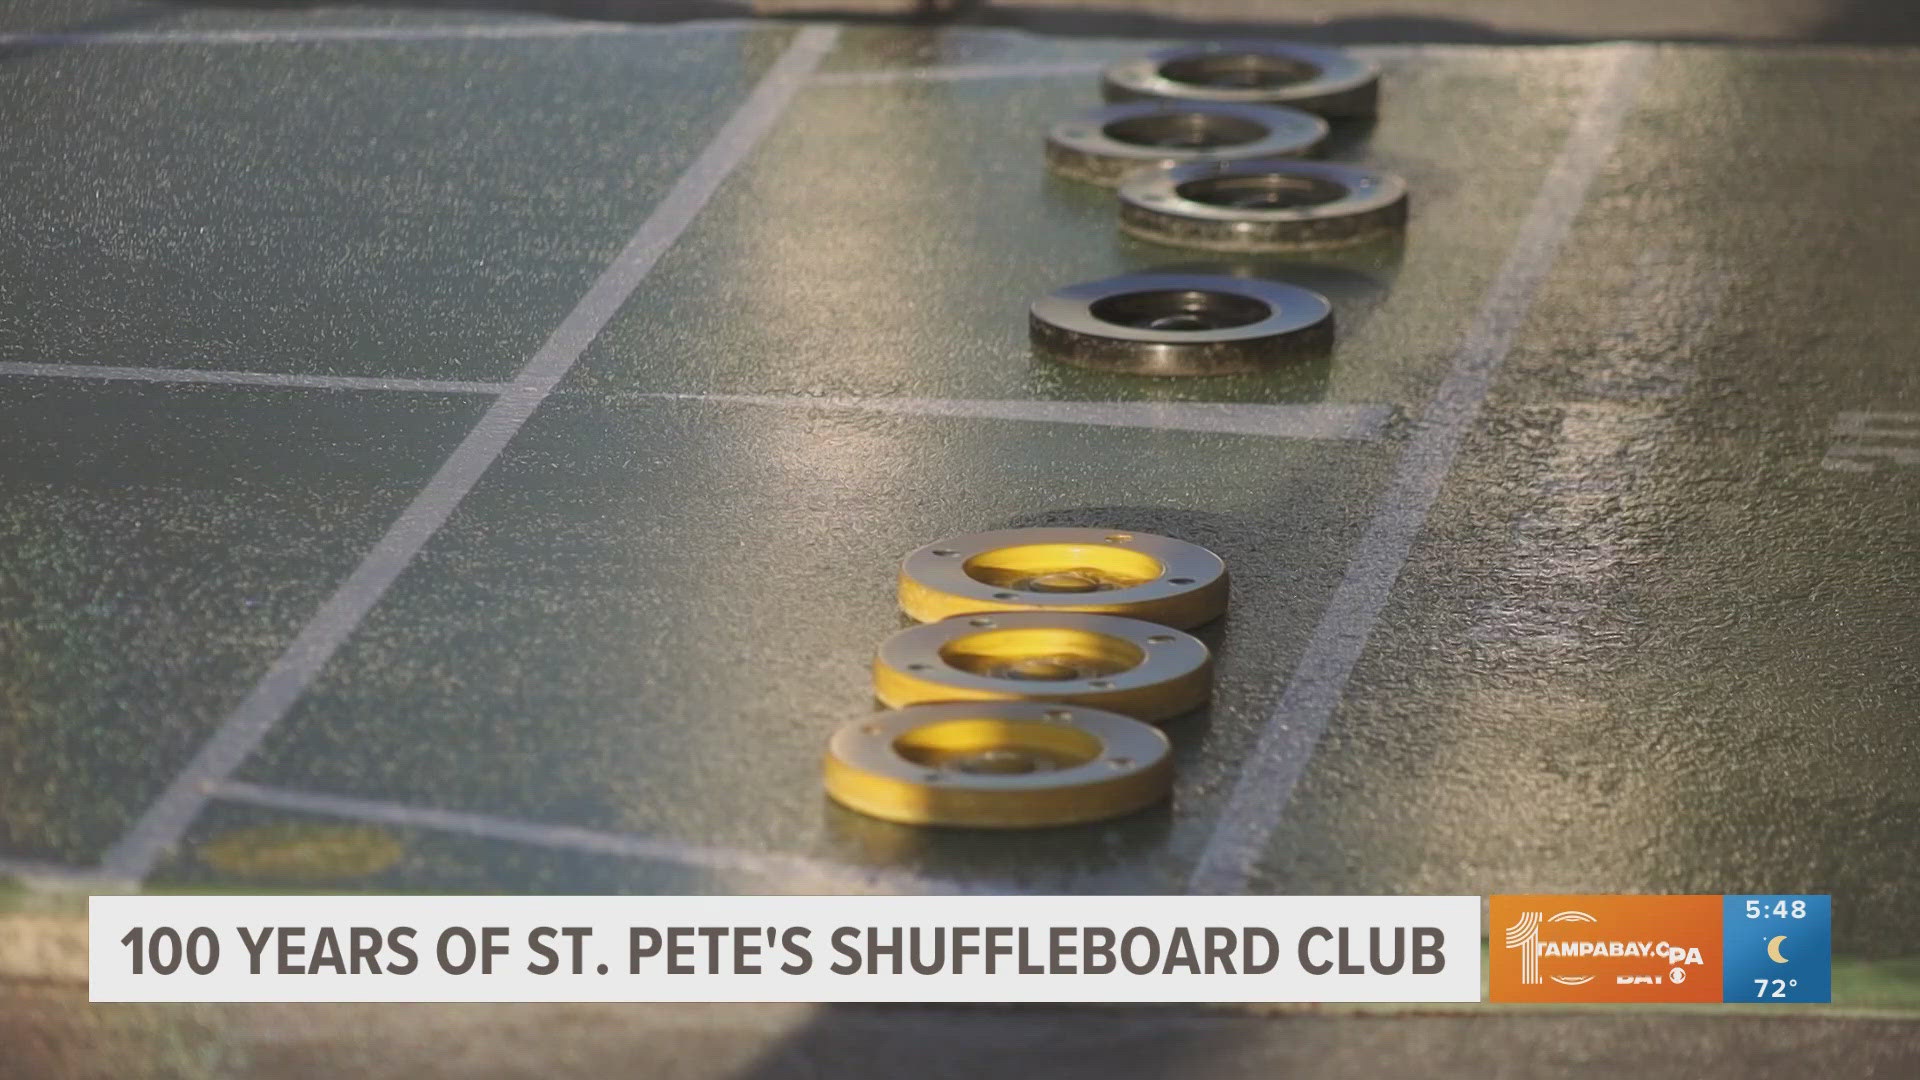 The organization is now the oldest and largest shuffleboard club in the world.